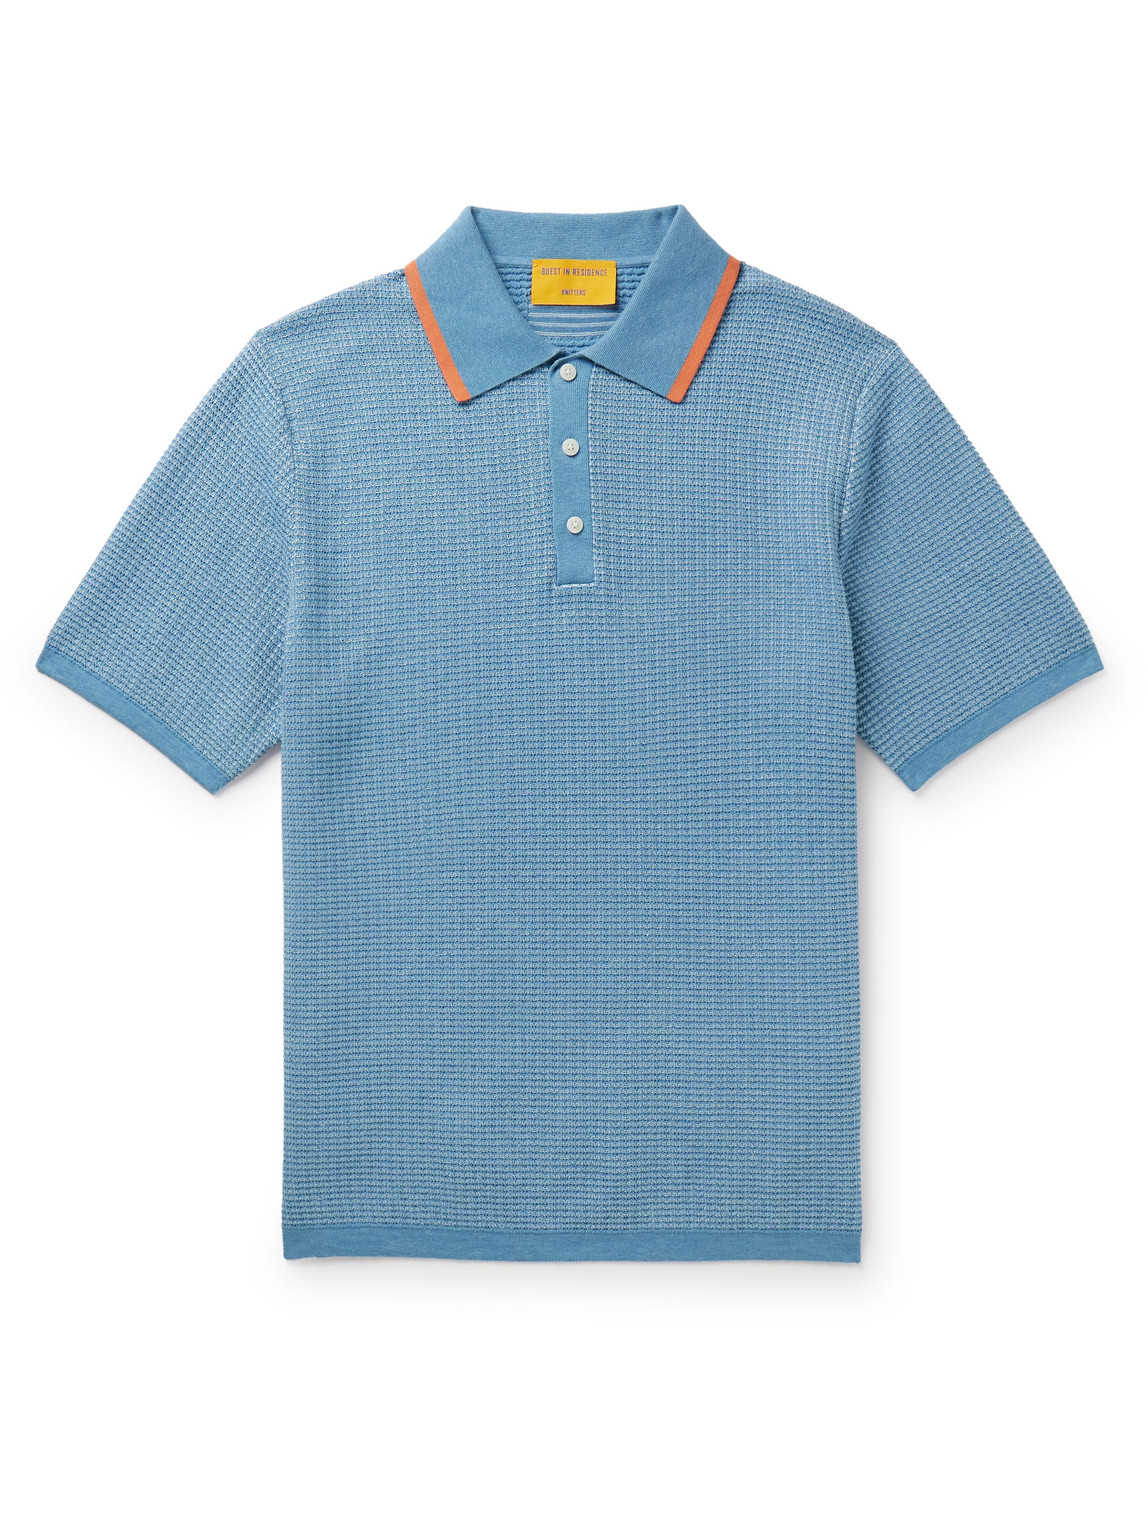 Guest In Residence - Striped Textured-Knit Cotton Polo Shirt - Men - Blue - S von Guest In Residence